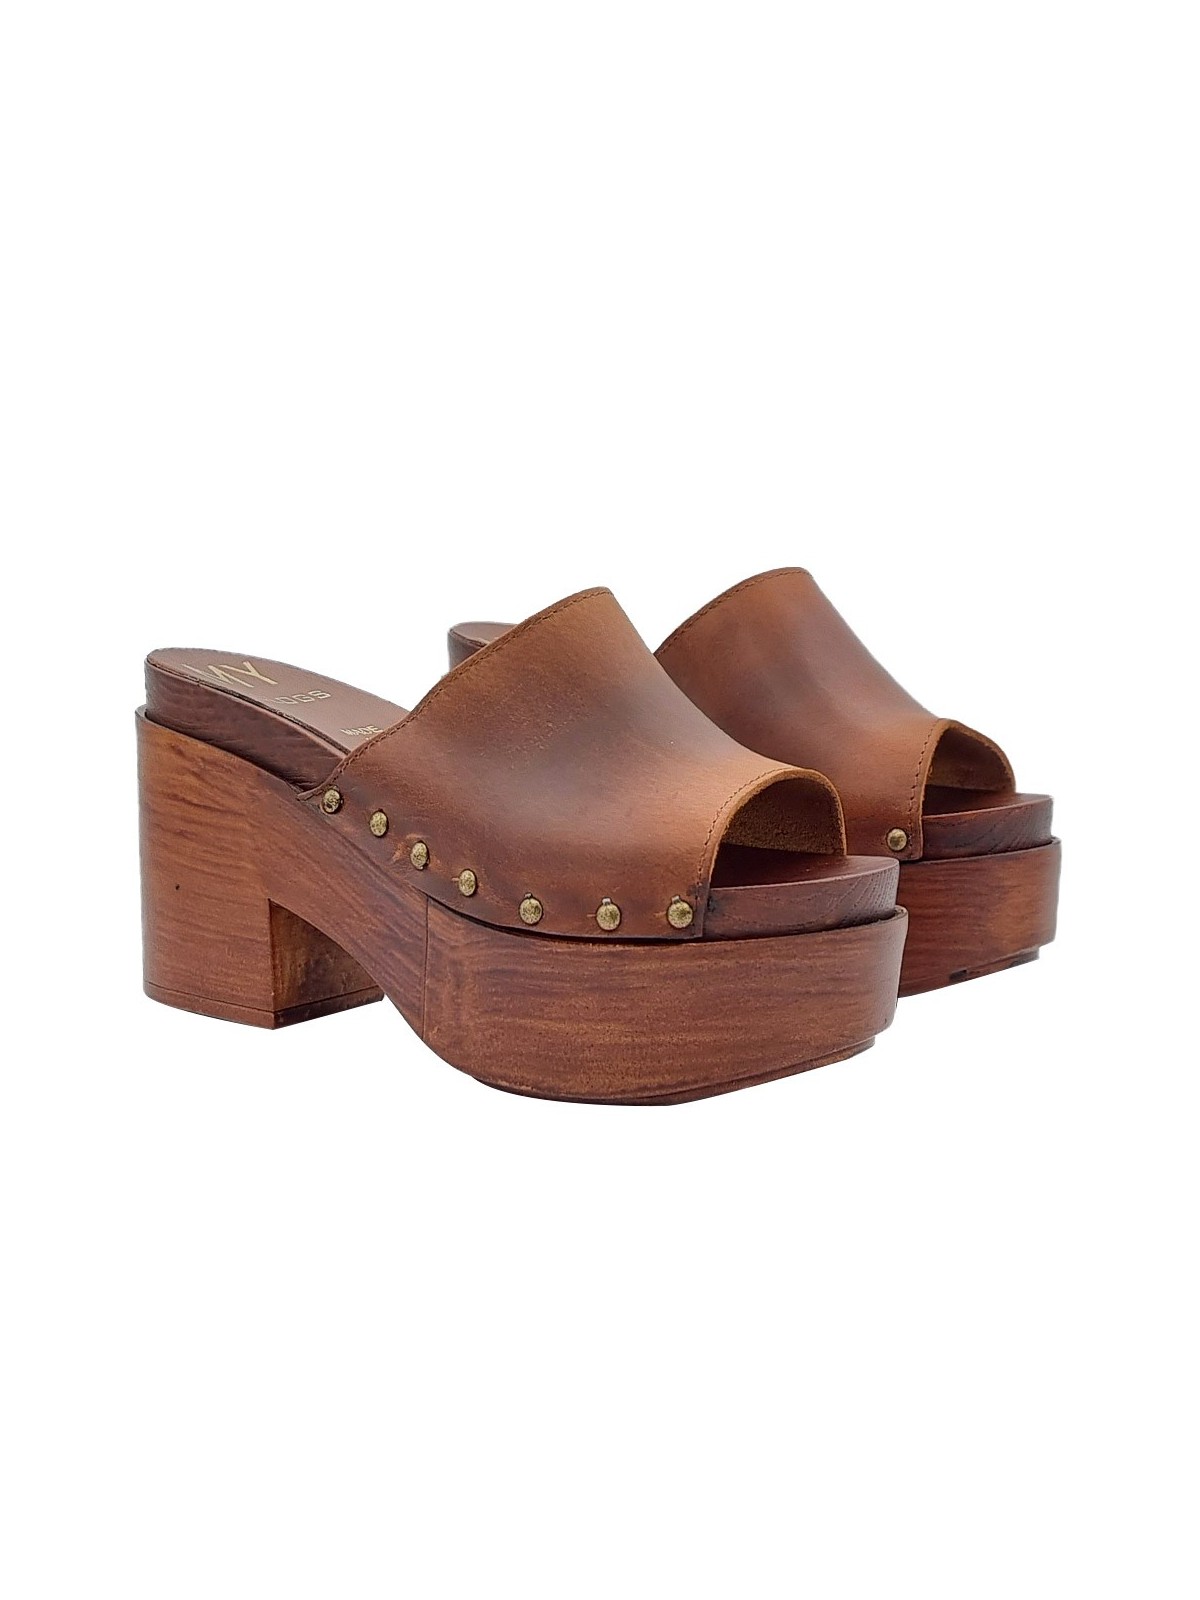 BROWN LEATHER CLOGS WITH HIGH HEEL